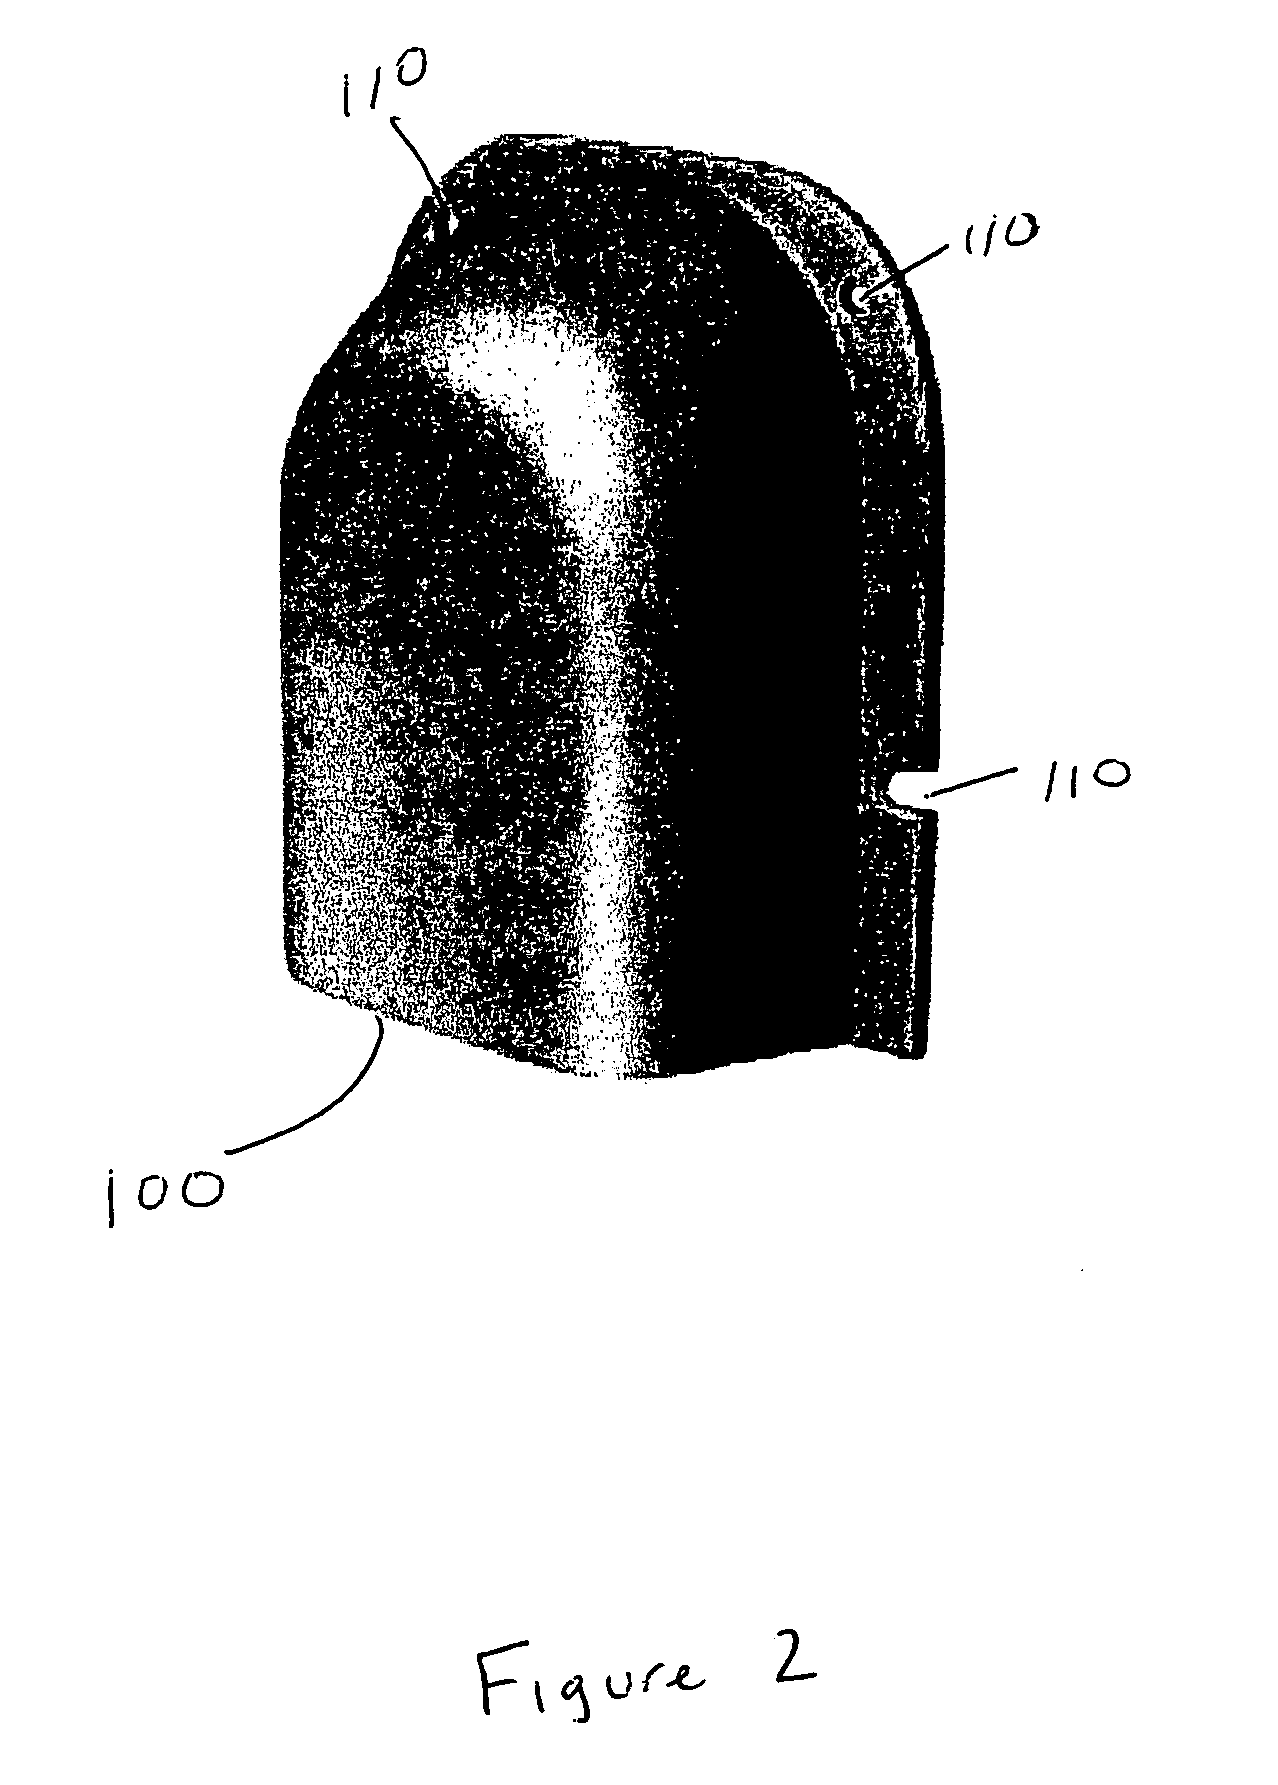 Apparatus for removing dissolved and suspended contaminants from waste water